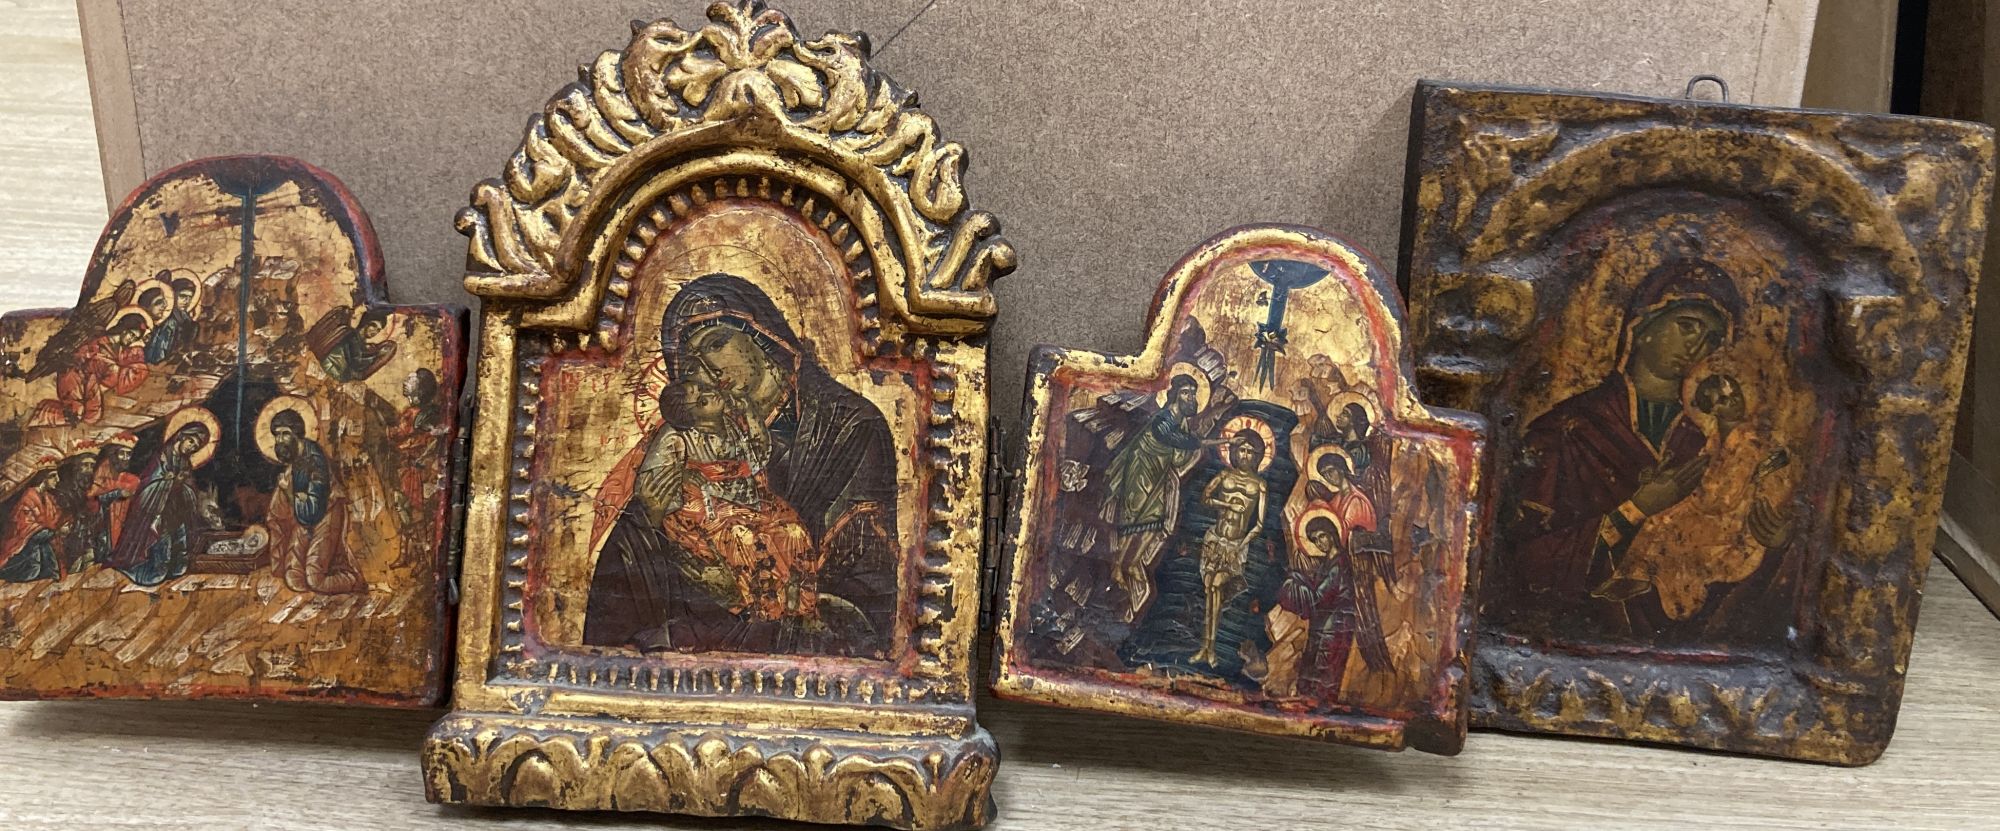 A tempera on wood triptych icon, height overall 25cm and a single Virgin and child icon, 21 x 17cm